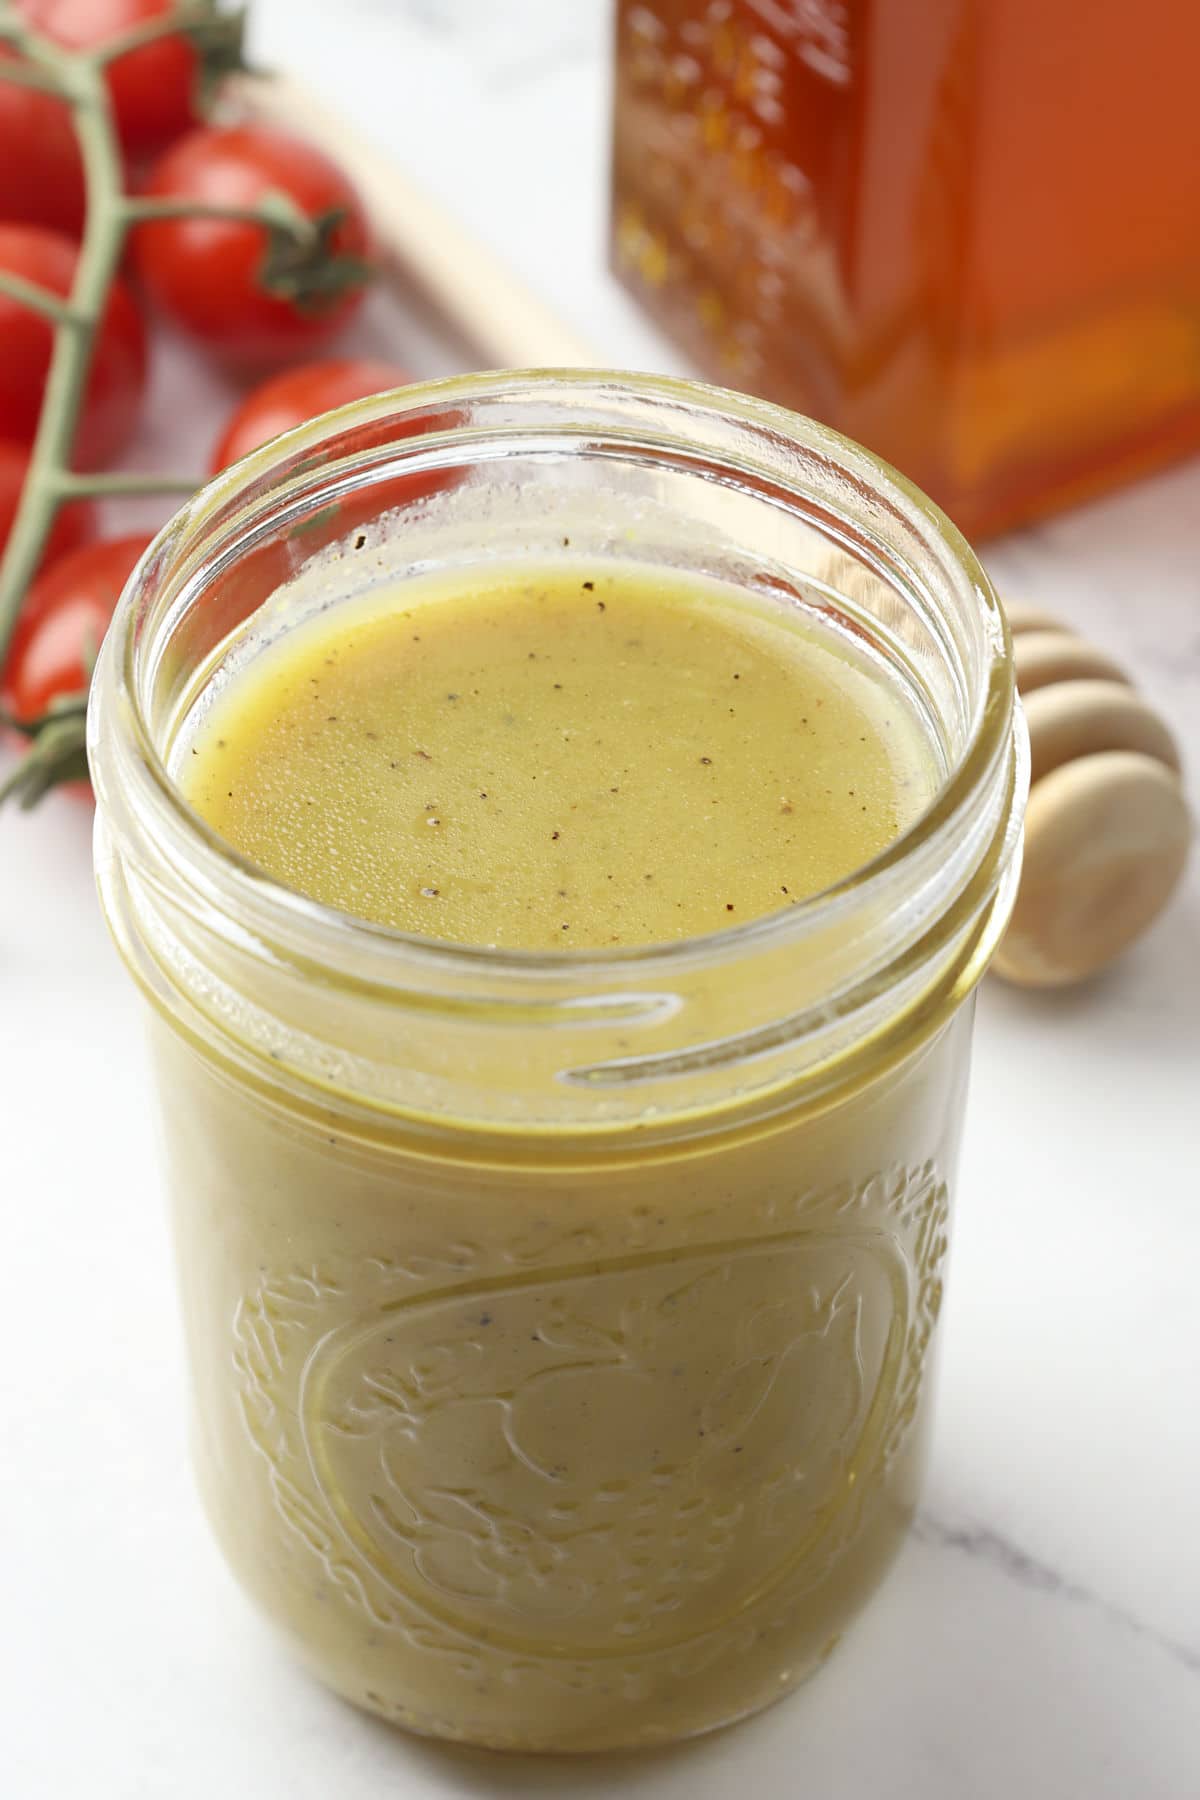 Jar of honey mustard dressing next to a jar of honey and cherry tomatoes.